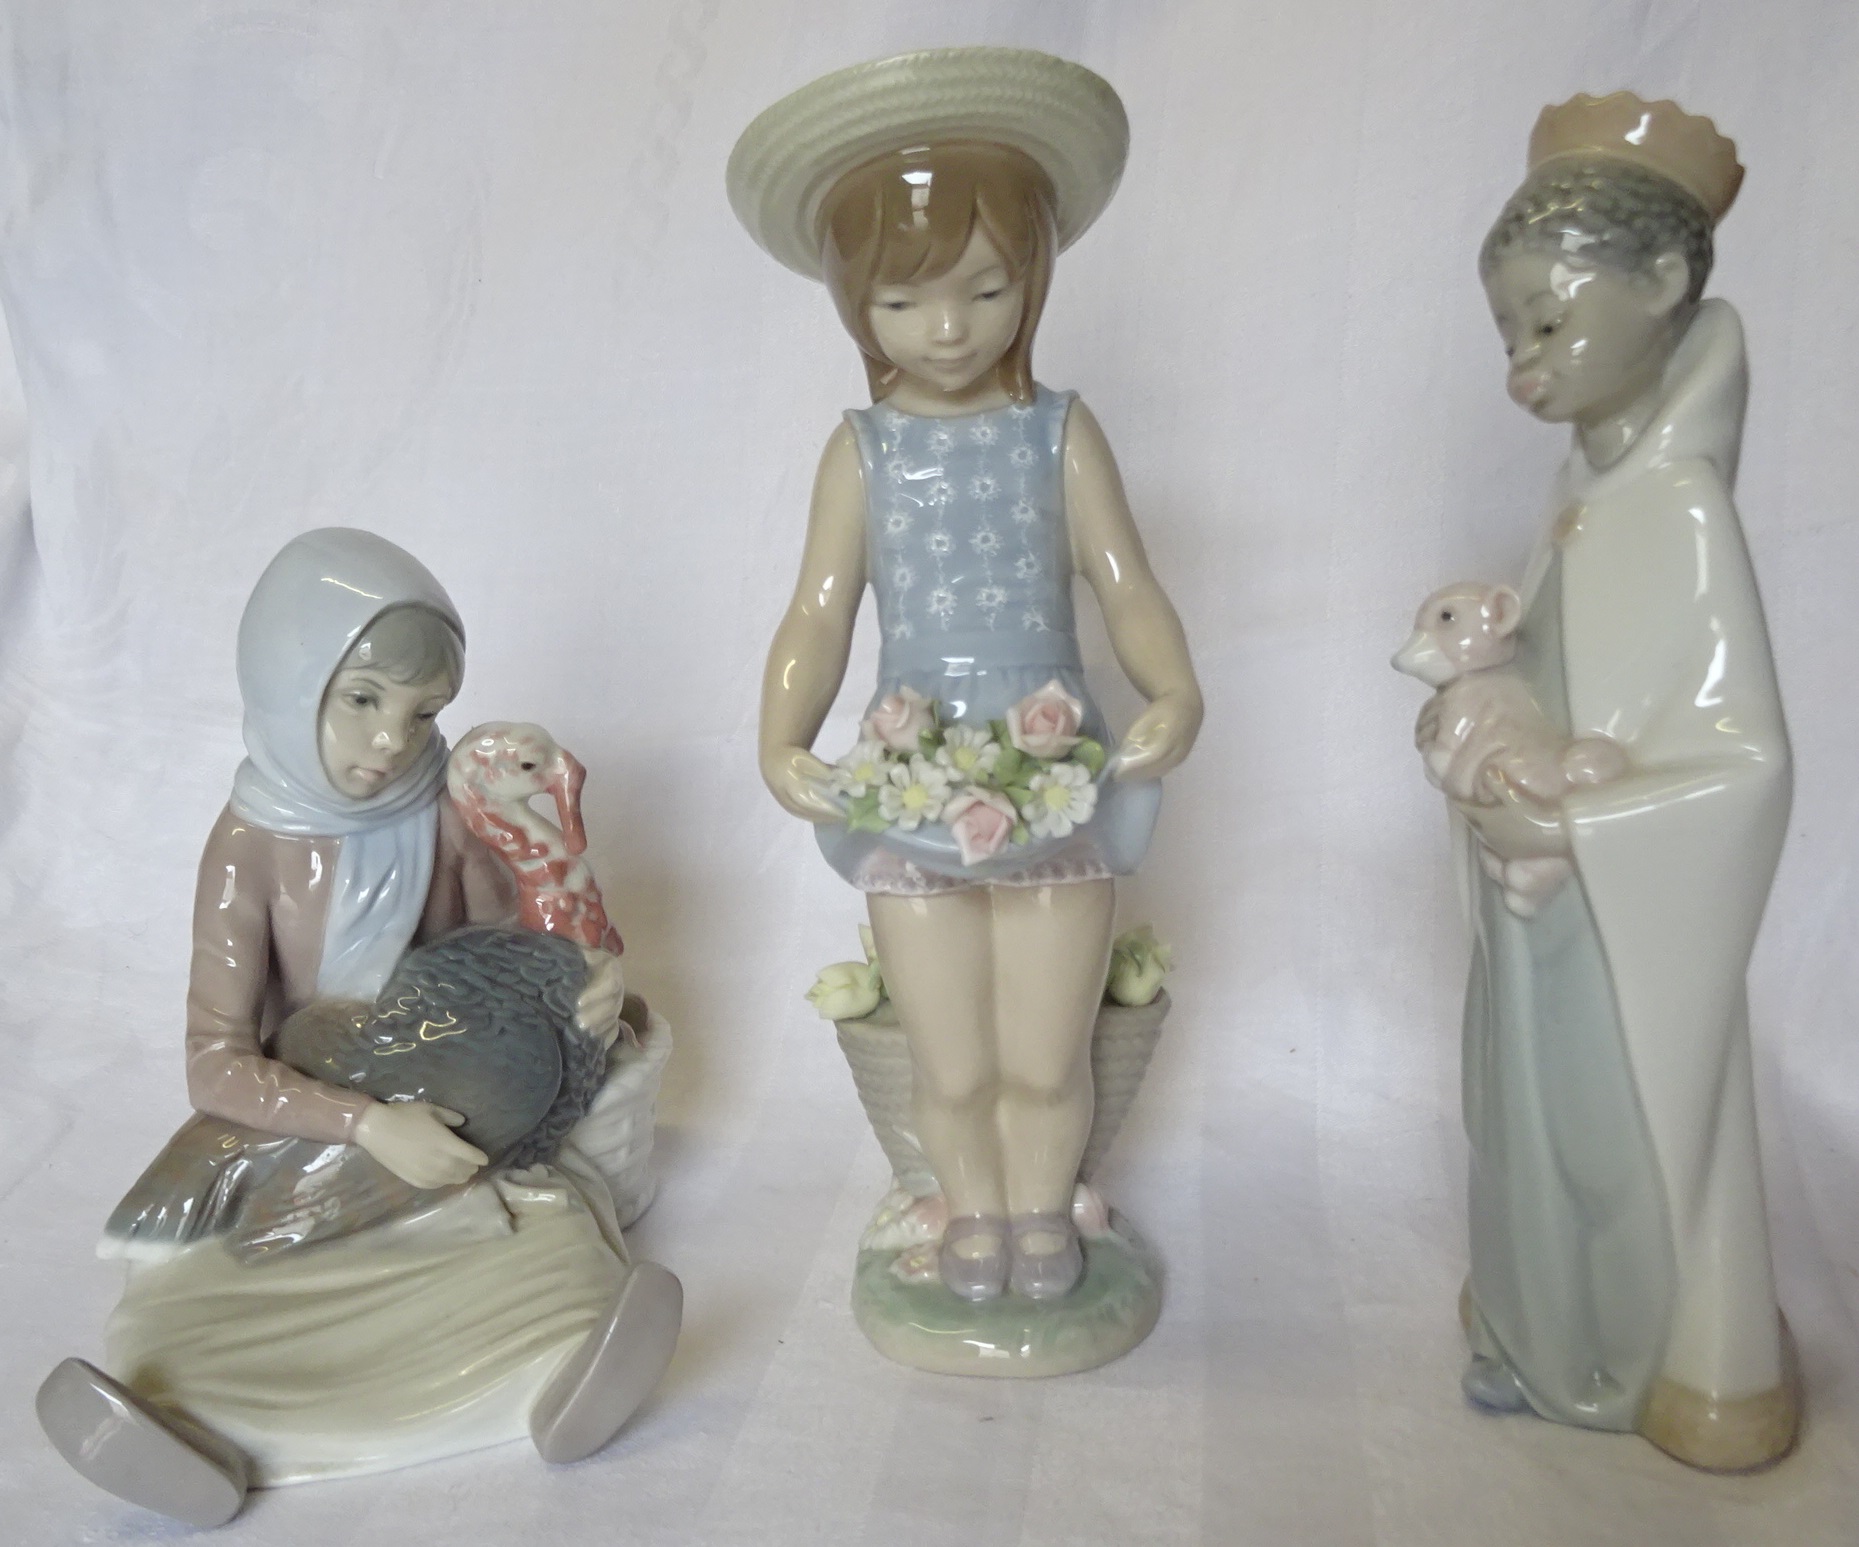 A Lladro Standing Figure of a girl holding flowers, another holding a lamb, and a Seated Figure with